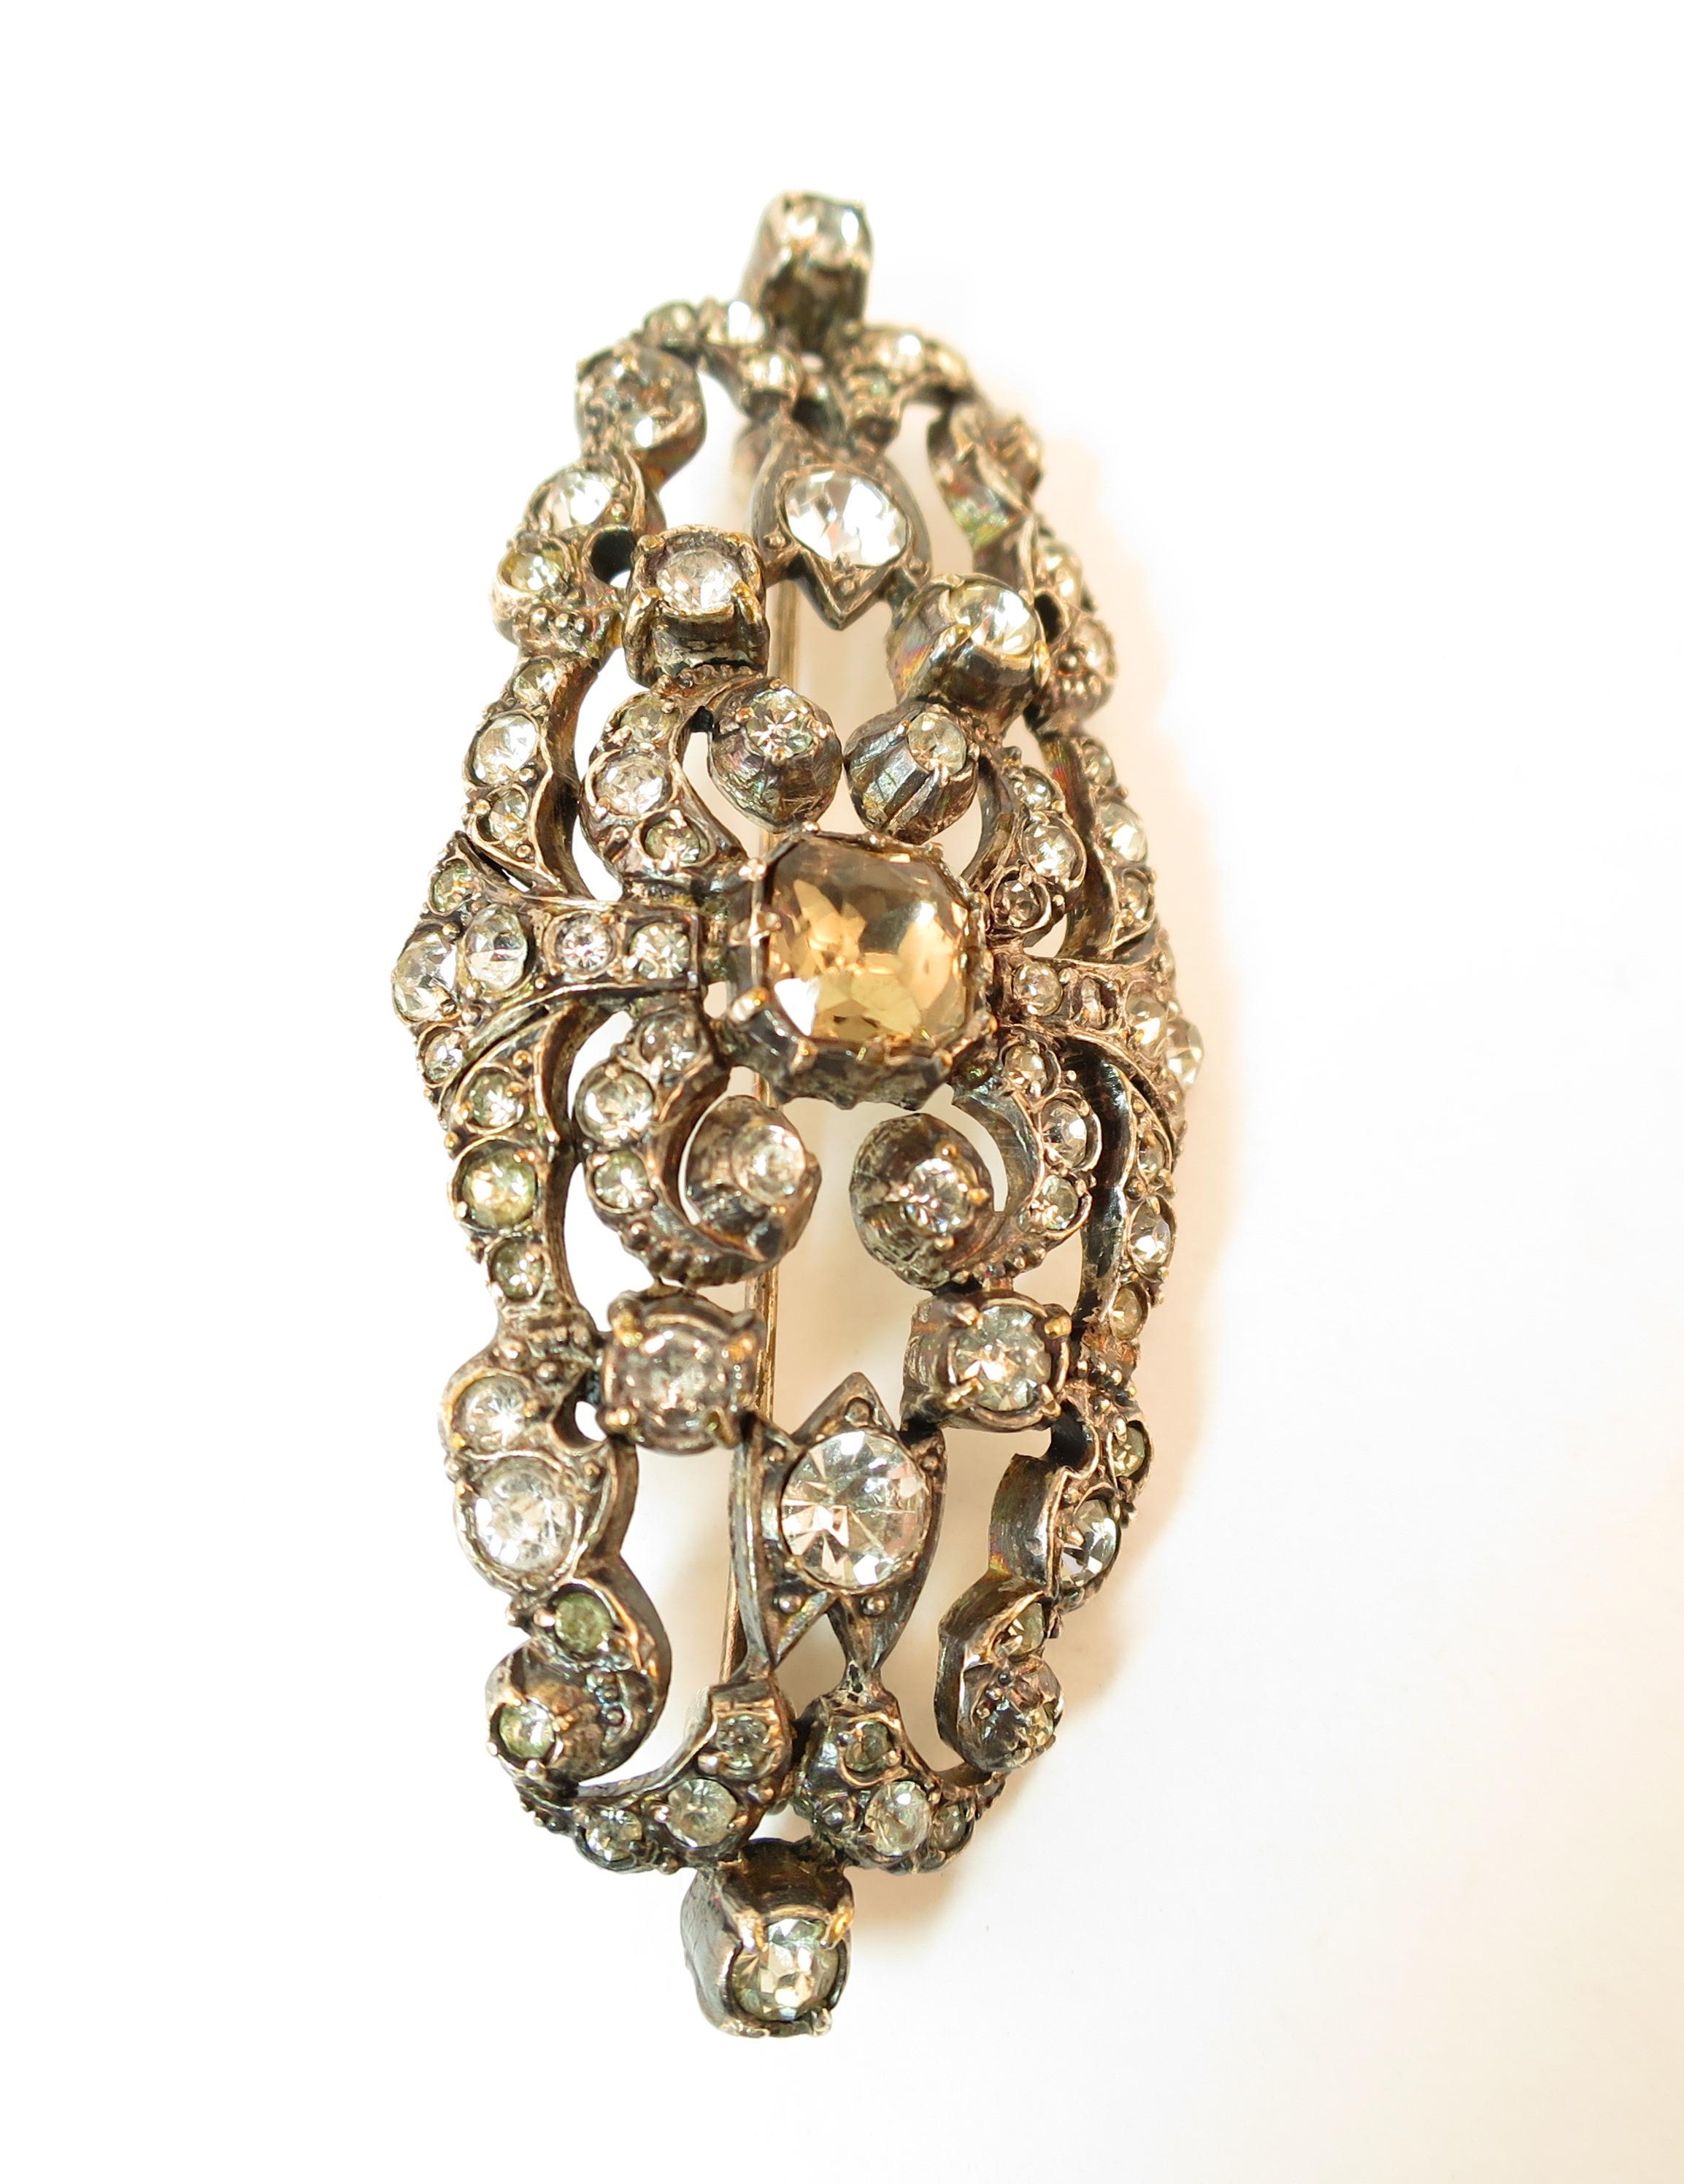 Edwardian Hand-Wrought Sterling & French Paste Brooch Circa 1905 For Sale 1